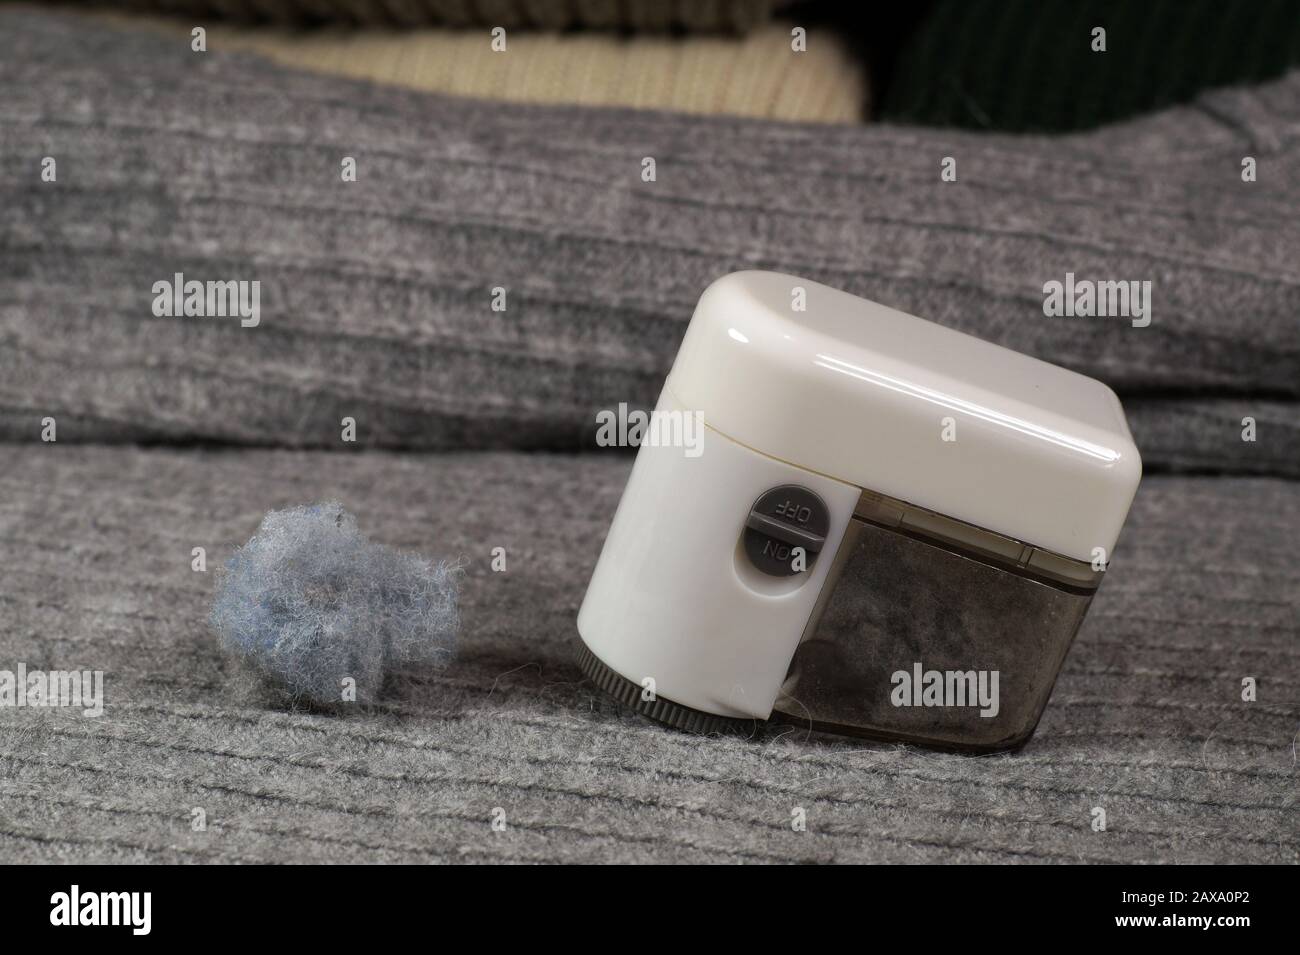 Removing lint (pilling) from the sweater. Device and collected lint. Stock Photo